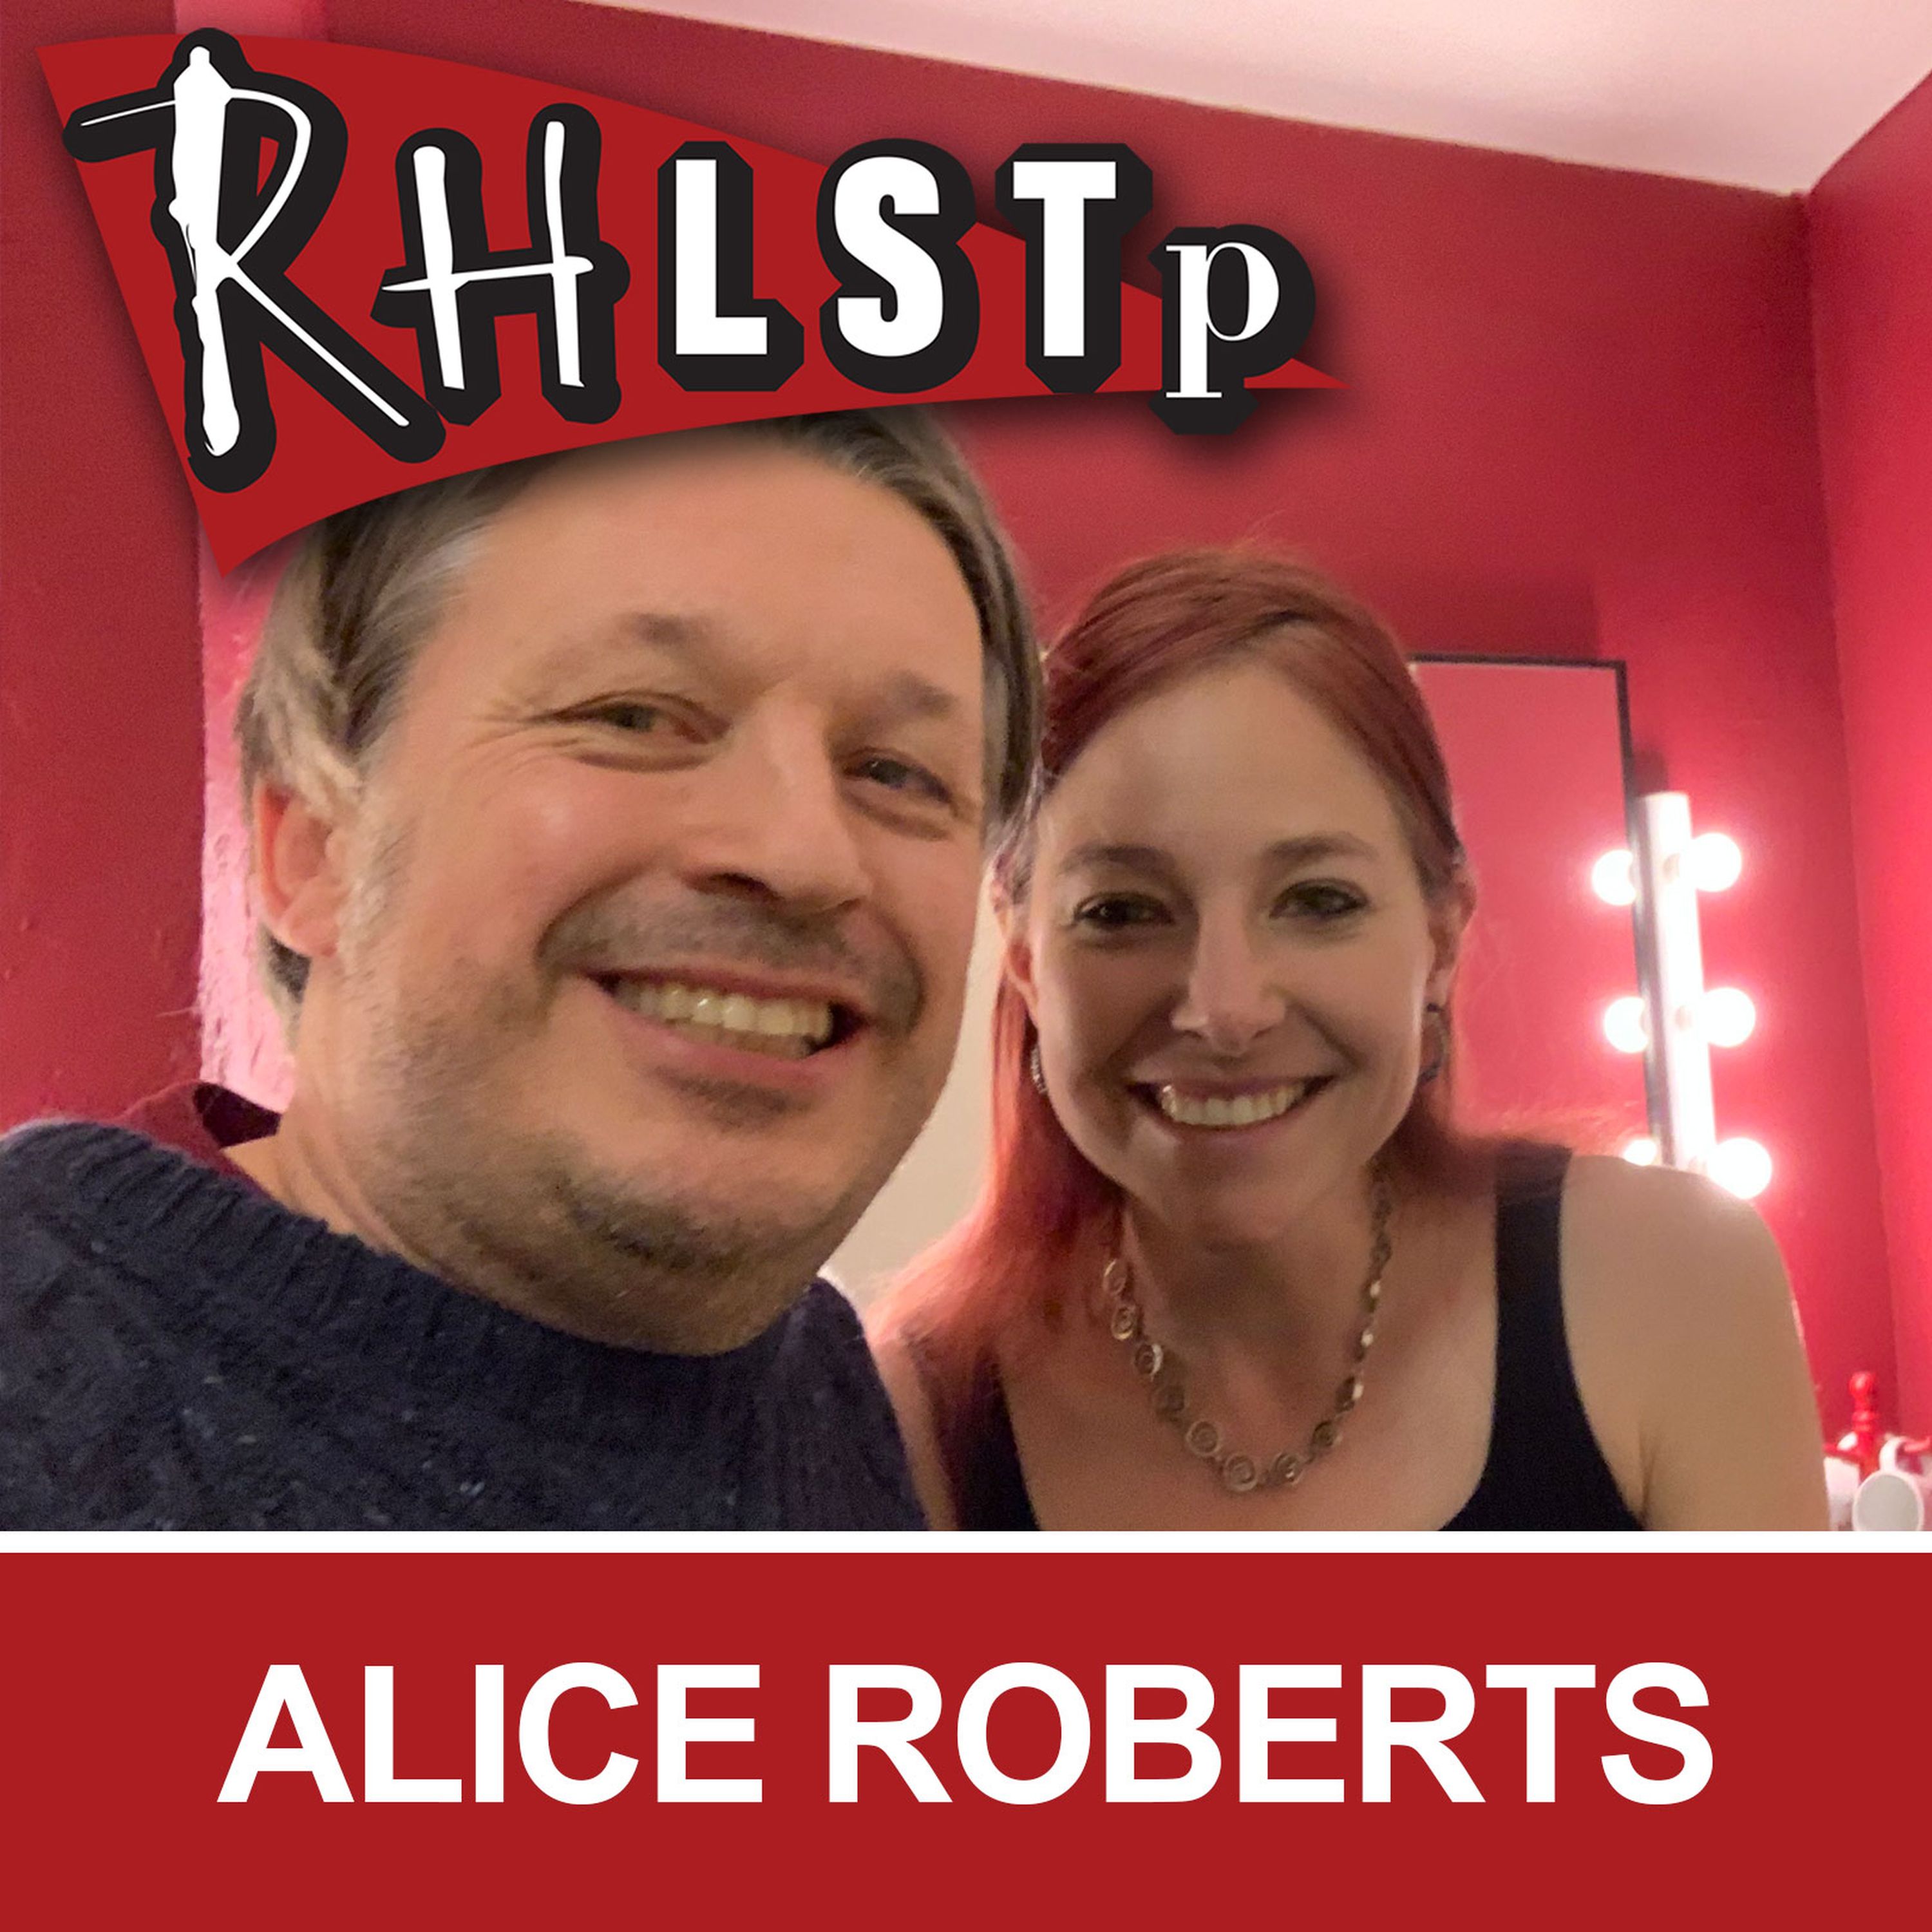 Professor Alice Roberts leads fundraising campaign to oppose state faith  schools in 2018 – Humanists UK